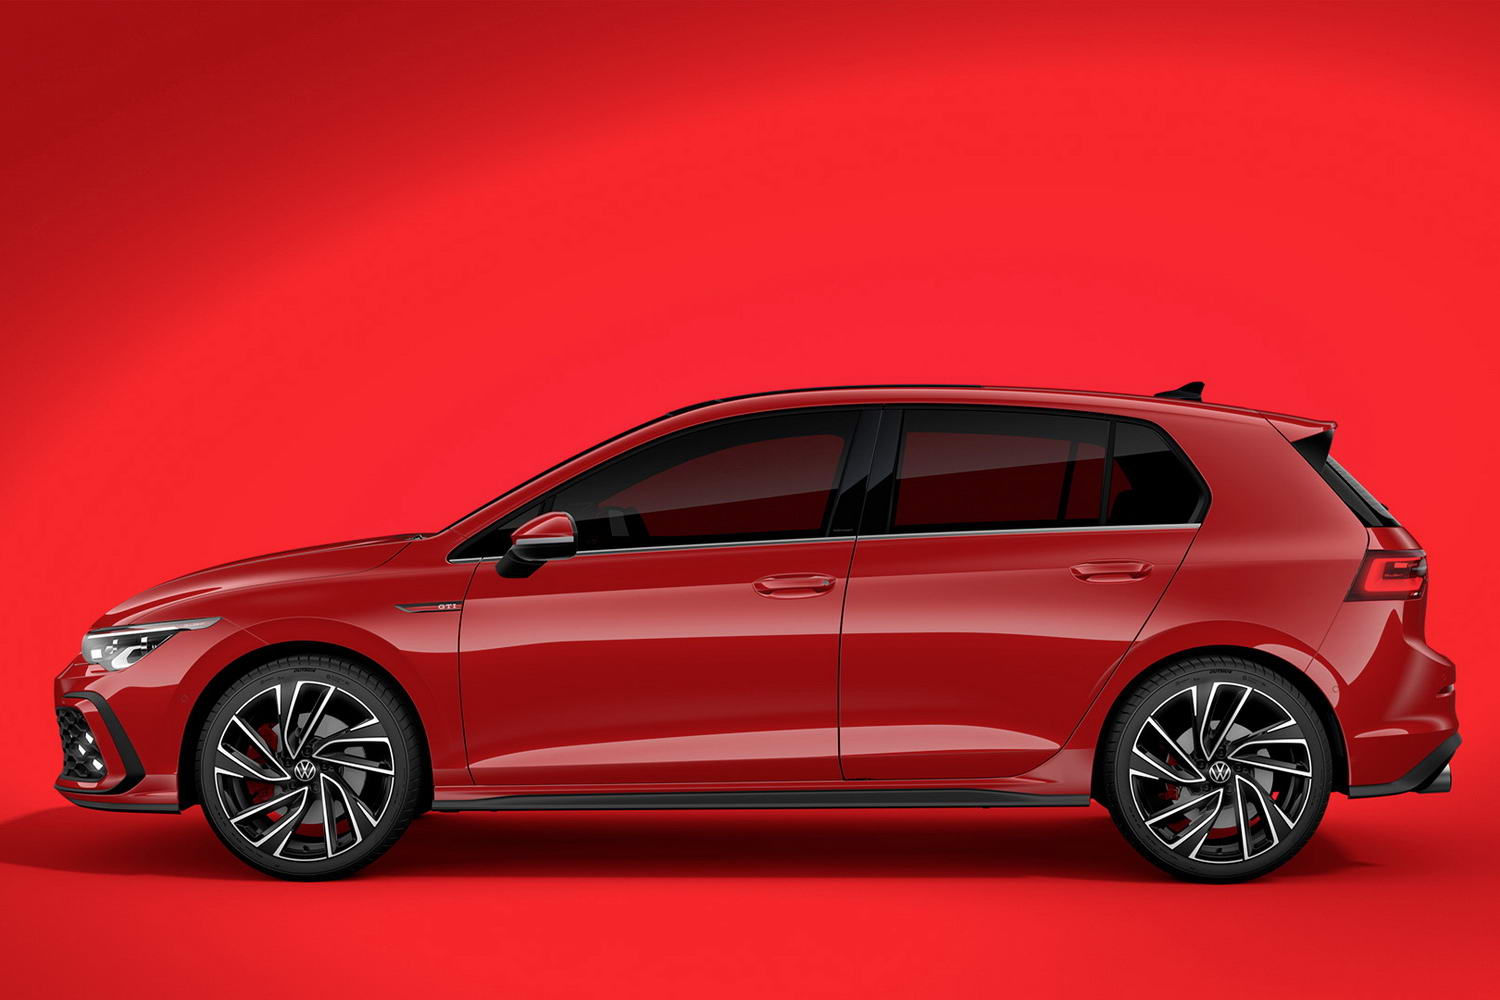 Volkswagen details new Golf GTI ahead of Irish launch - car and ...